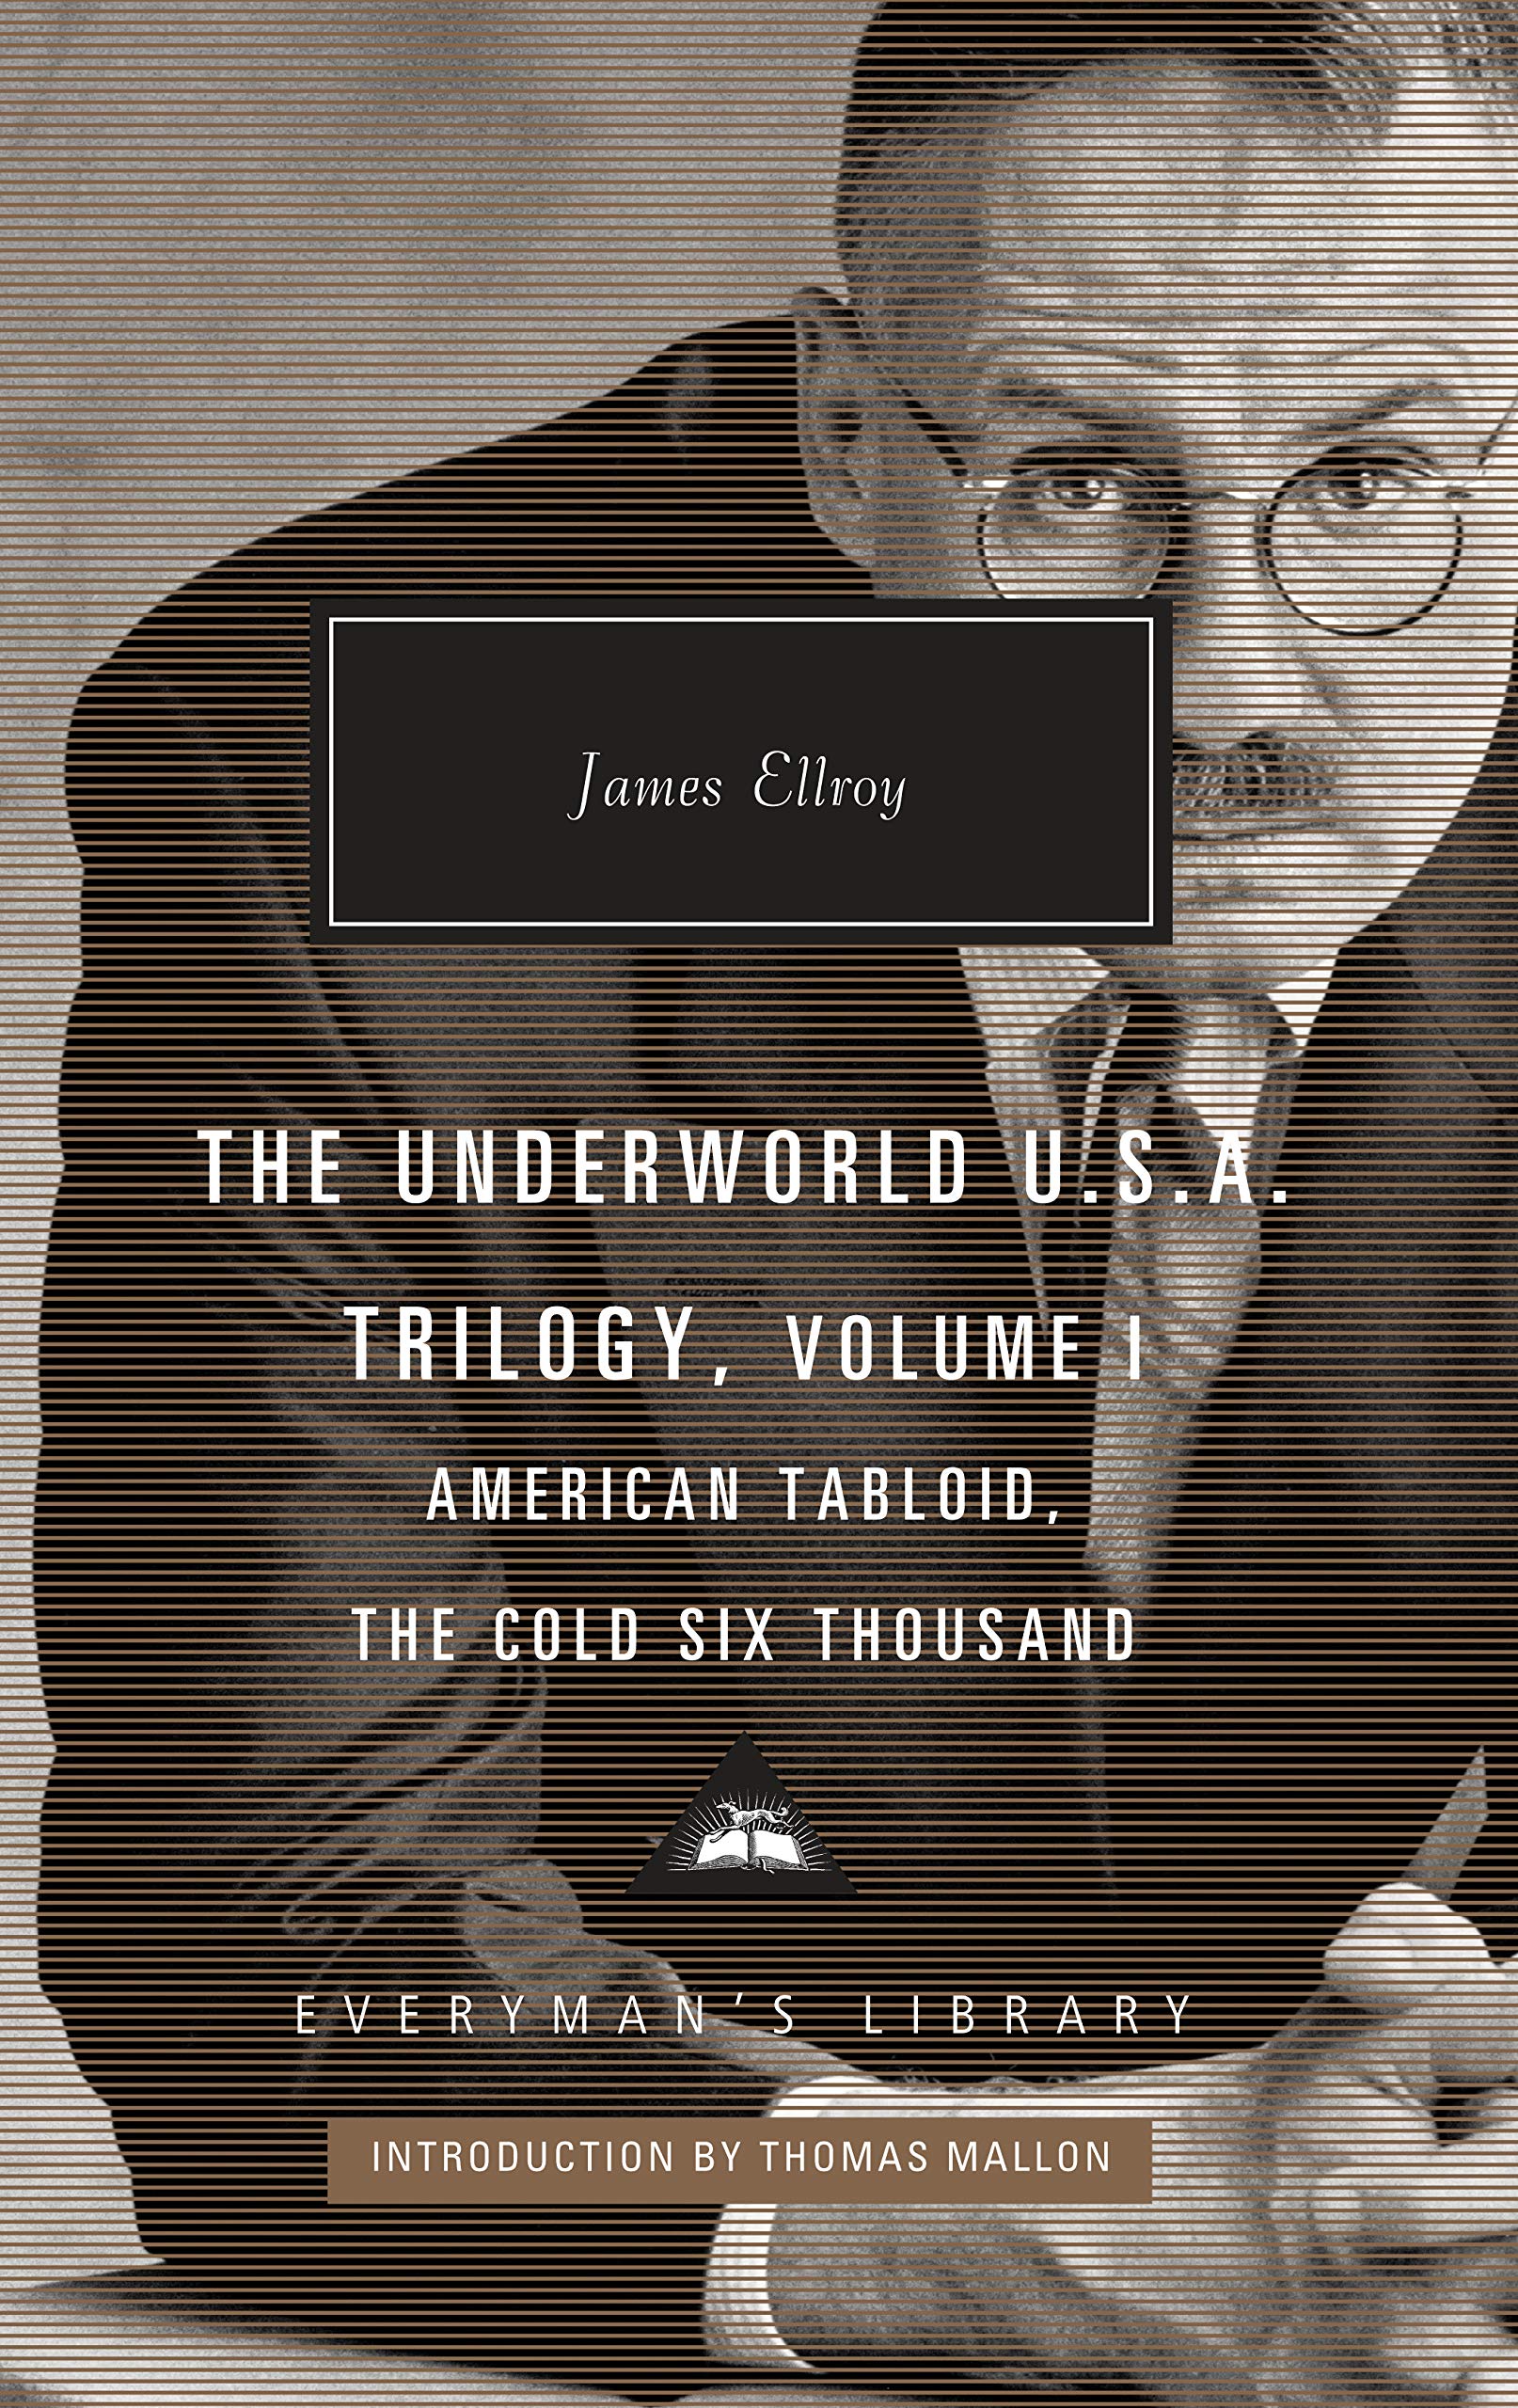 The Underworld U. S. A. Trilogy: American Tabloid, the Cold Six Thousand